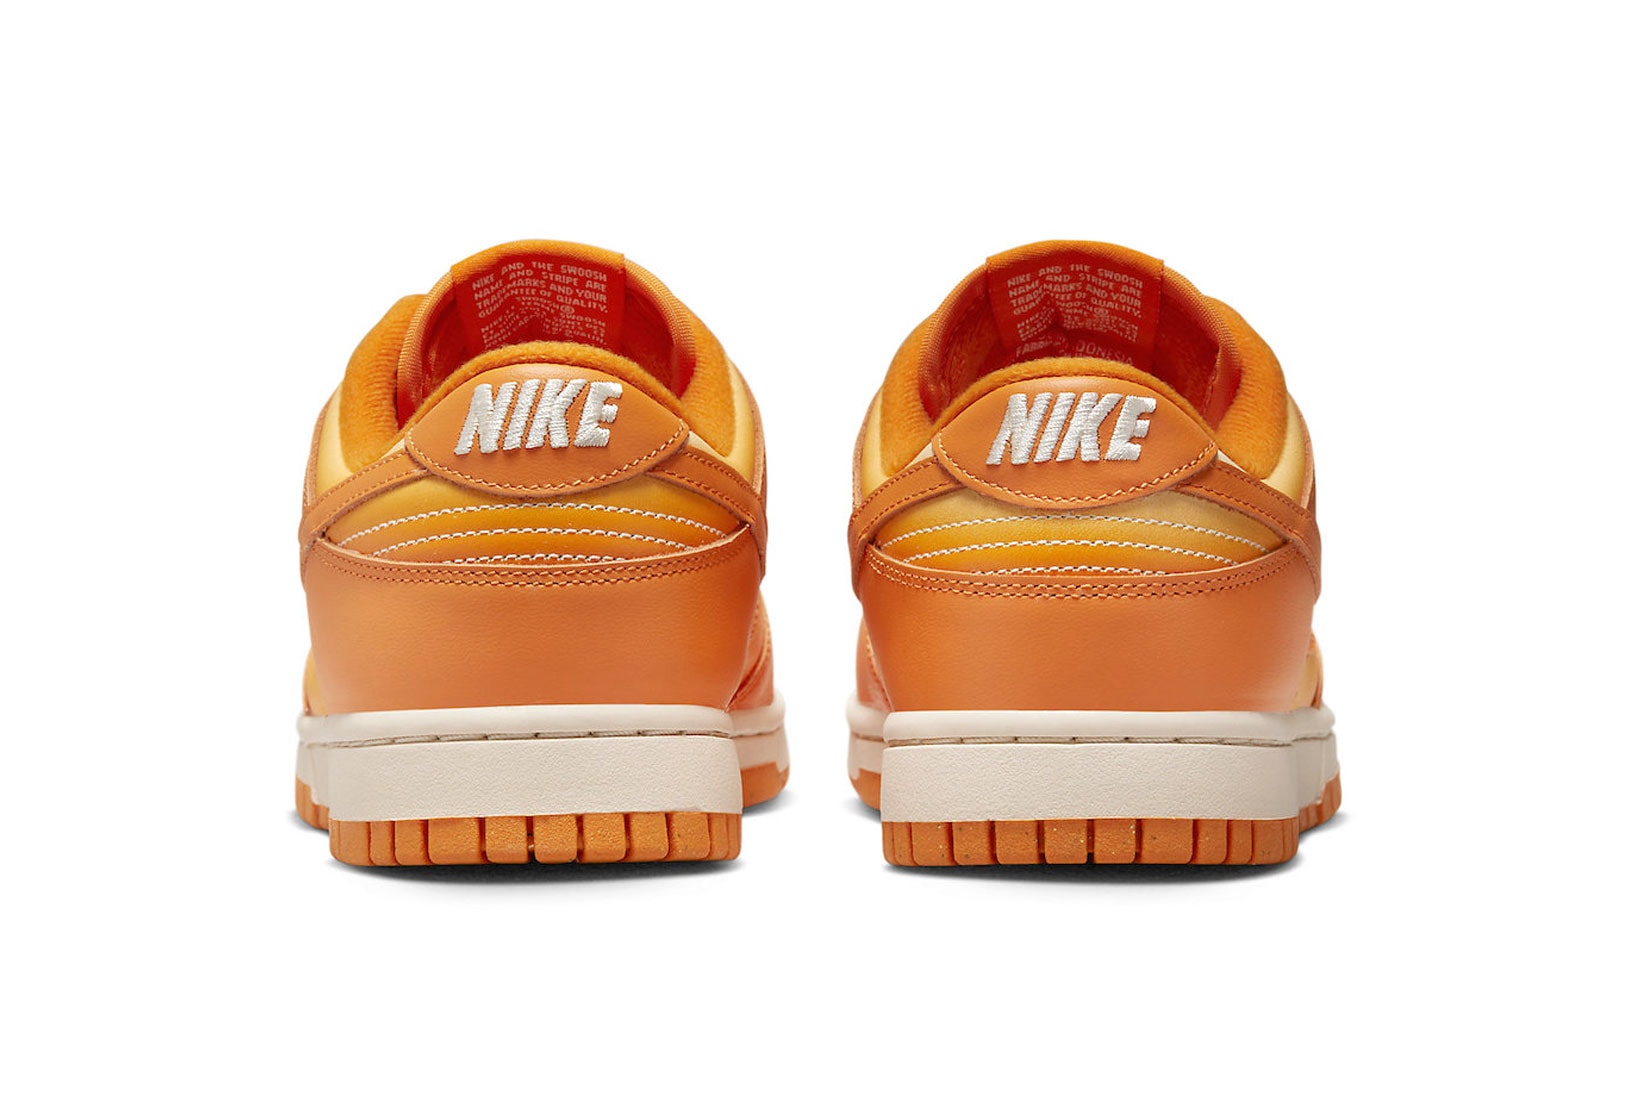 Nike Dunk Low Women's "Magma Orange" Release Restock Images Where to buy